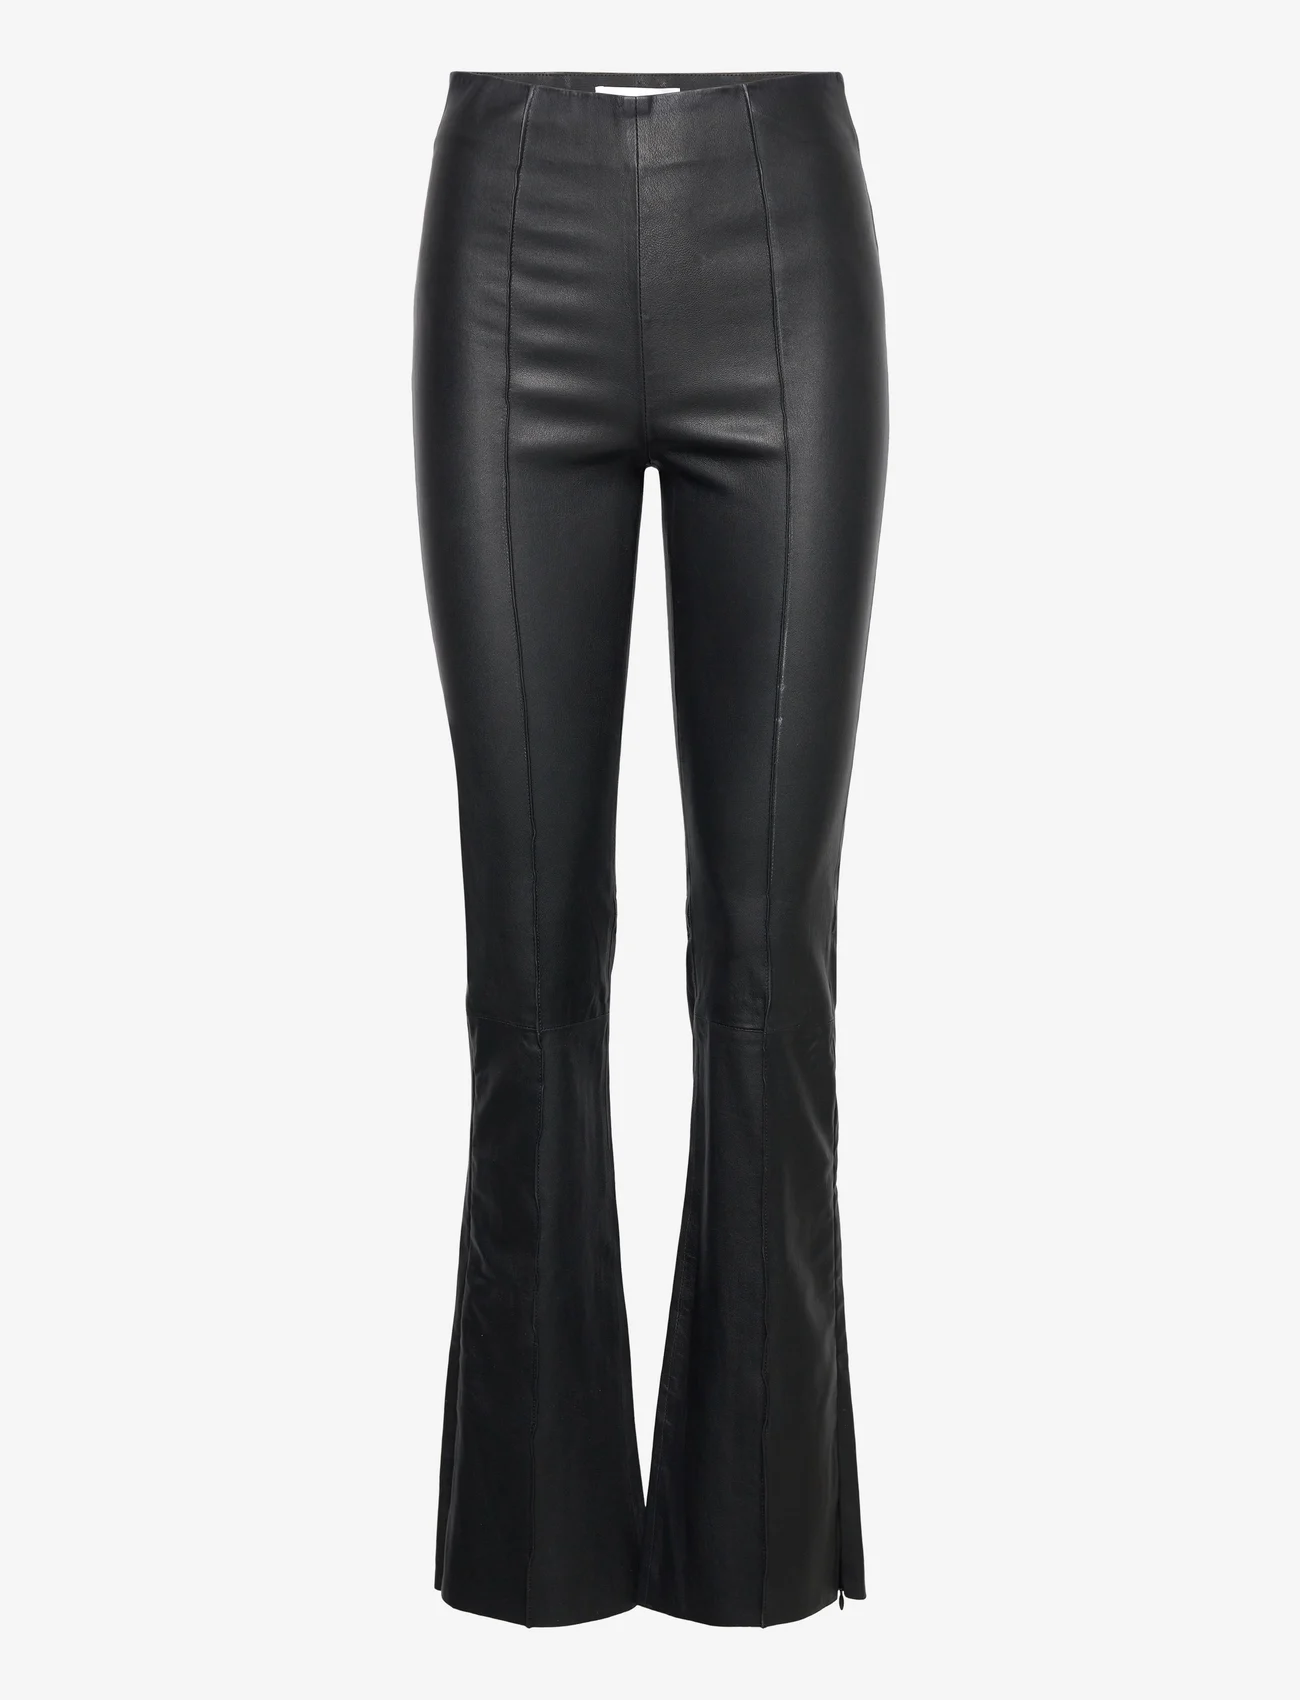 REMAIN Birger Christensen - Stretch Leather Pants - leather trousers - black - 0